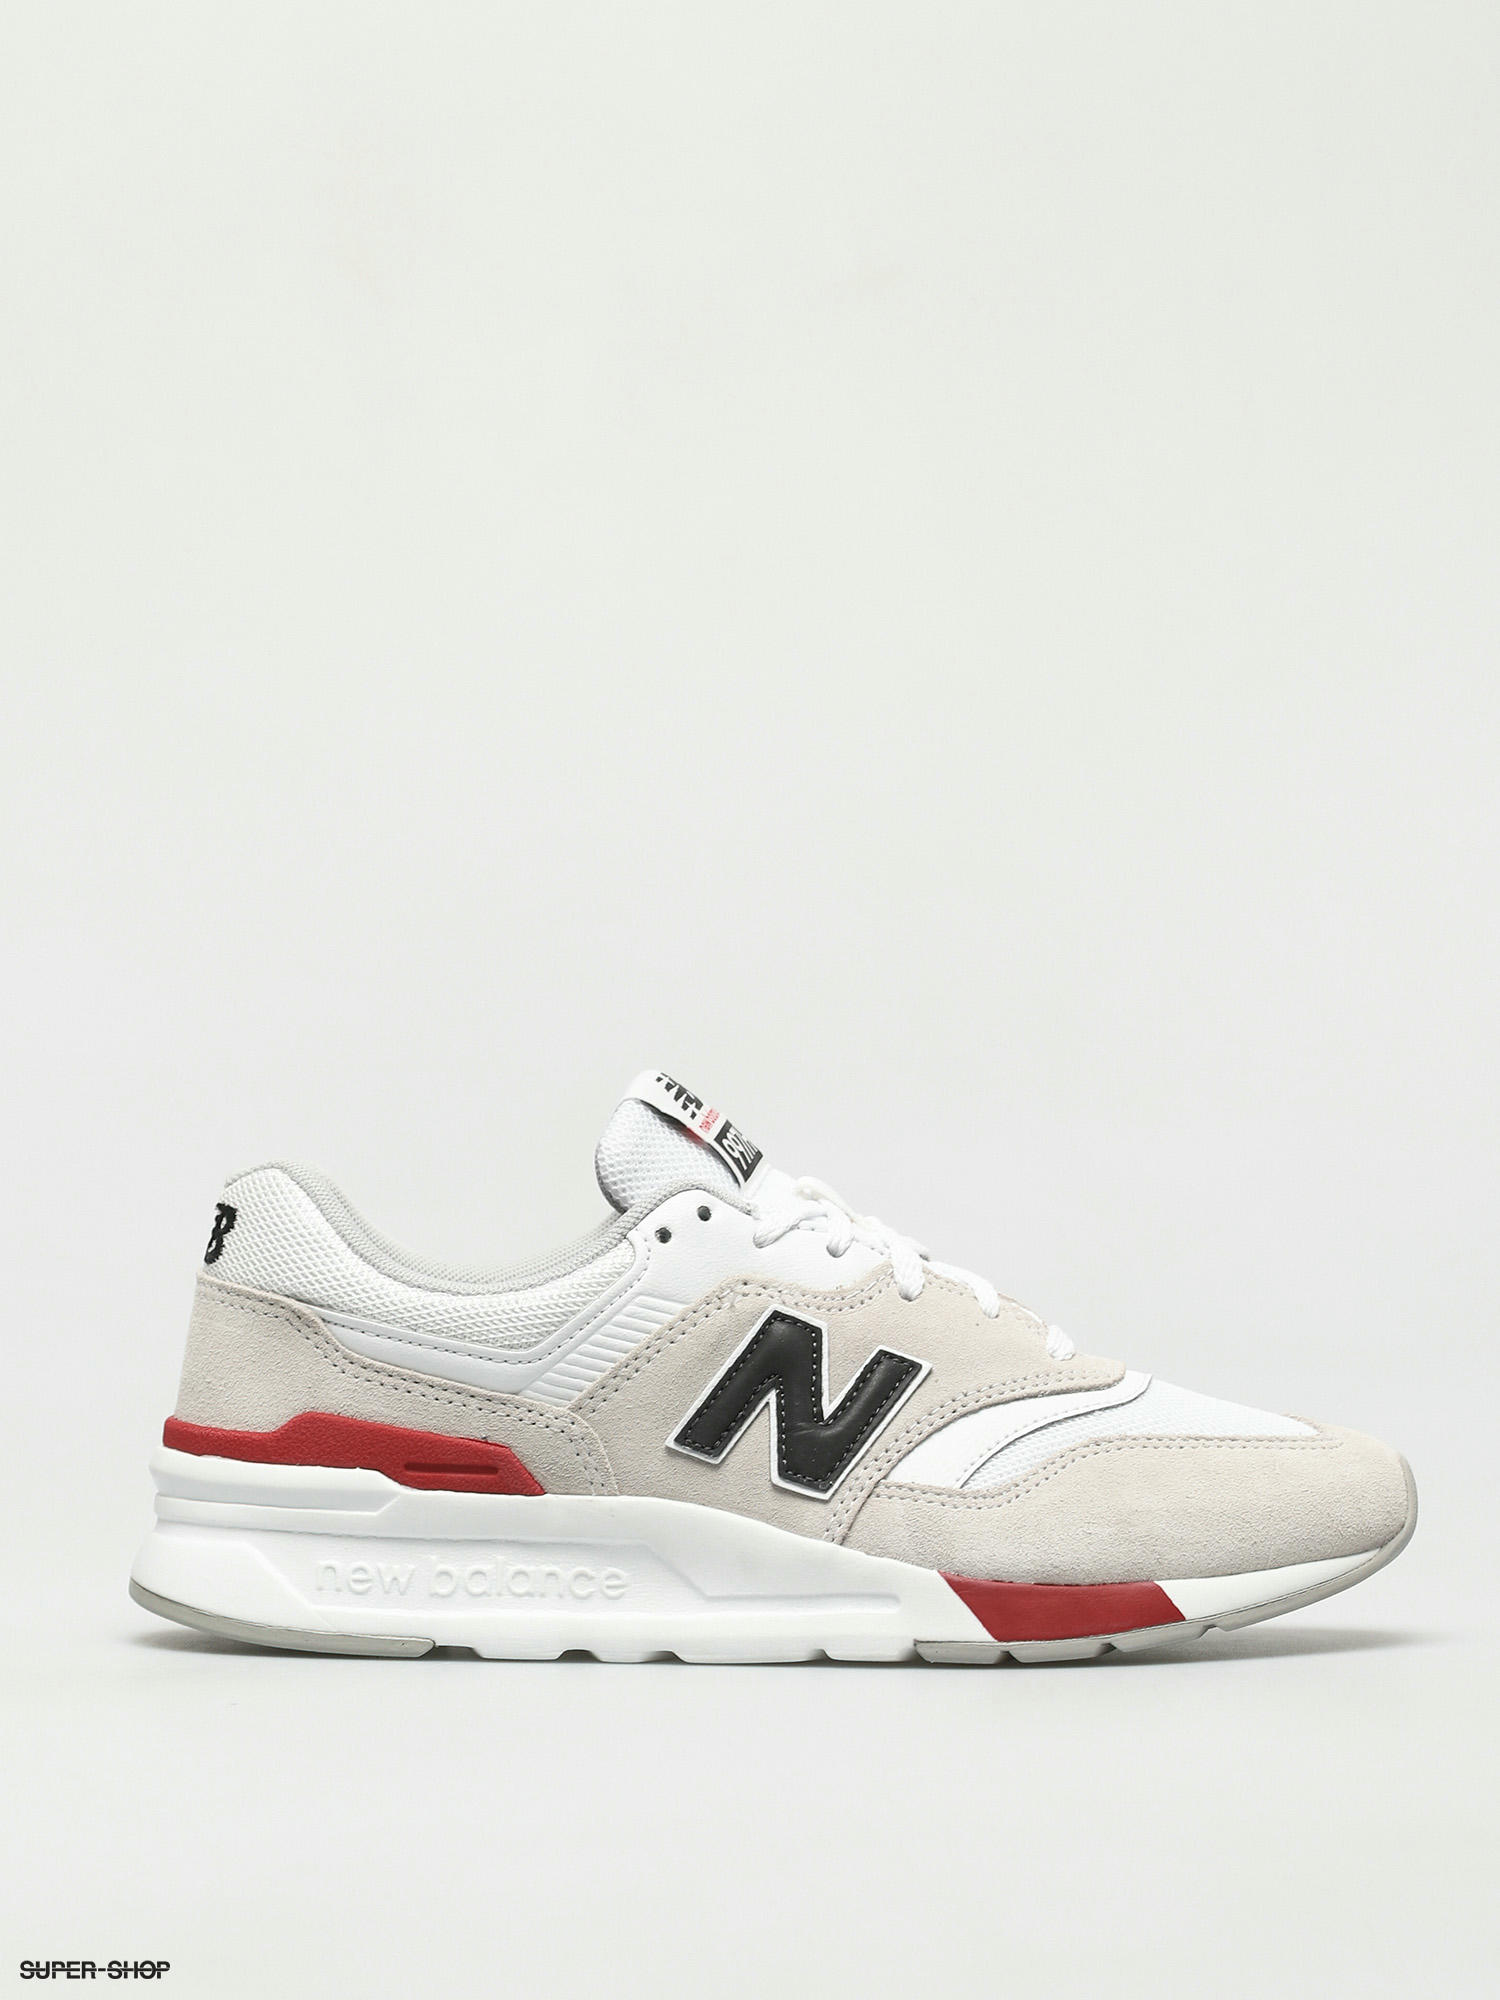 New Balance 997 Shoes (White/Red)